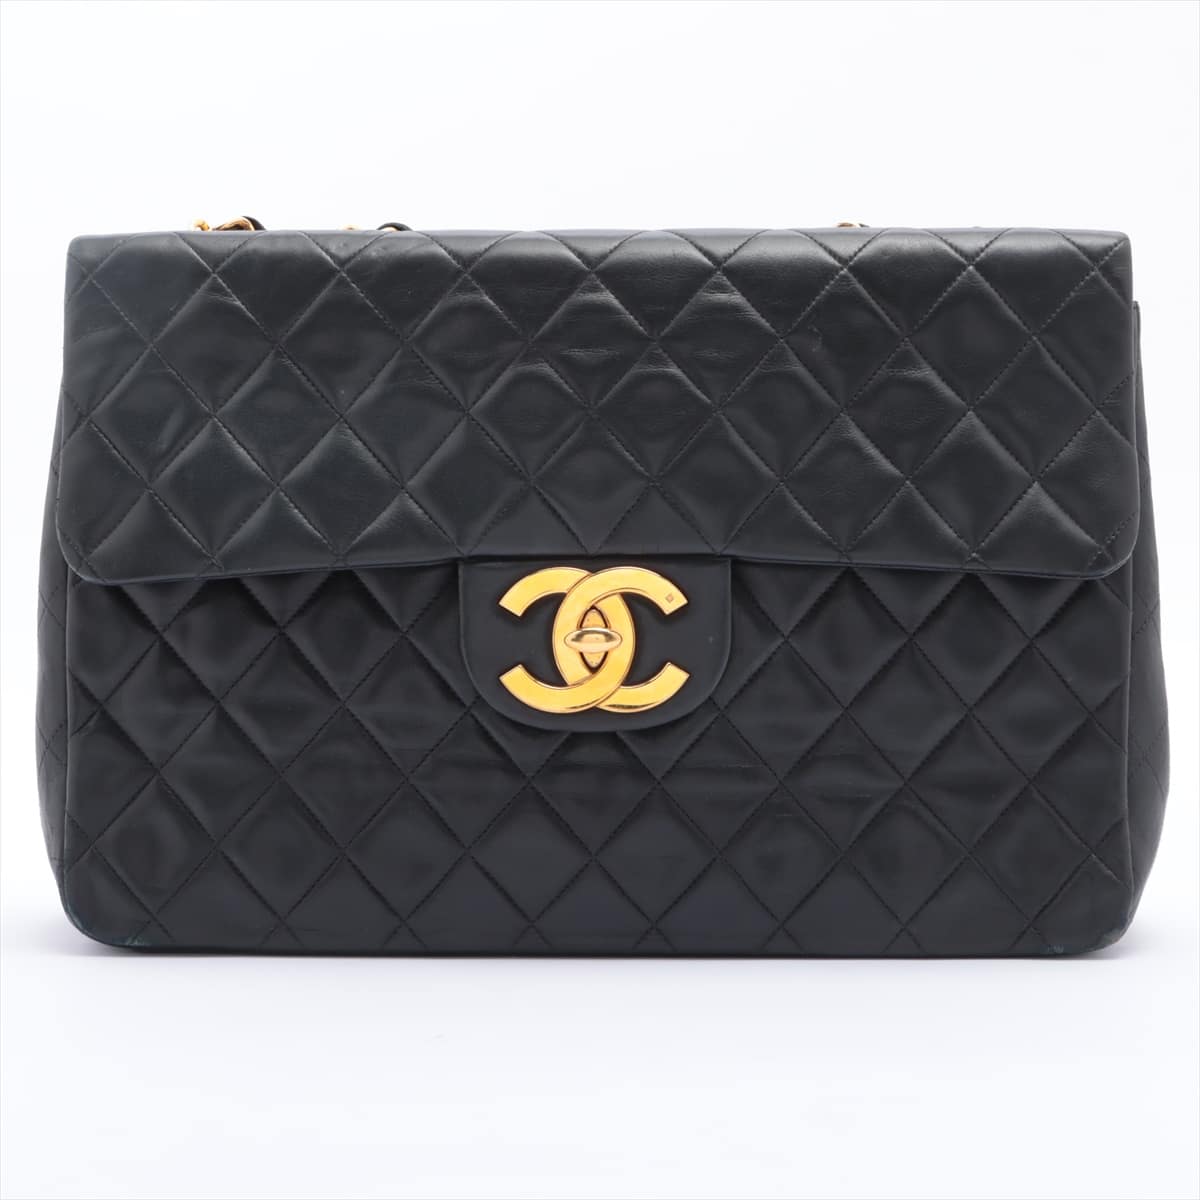 Chanel Big Matelasse Lambskin Single flap Double chain bag Black Gold Metal fittings with pouch